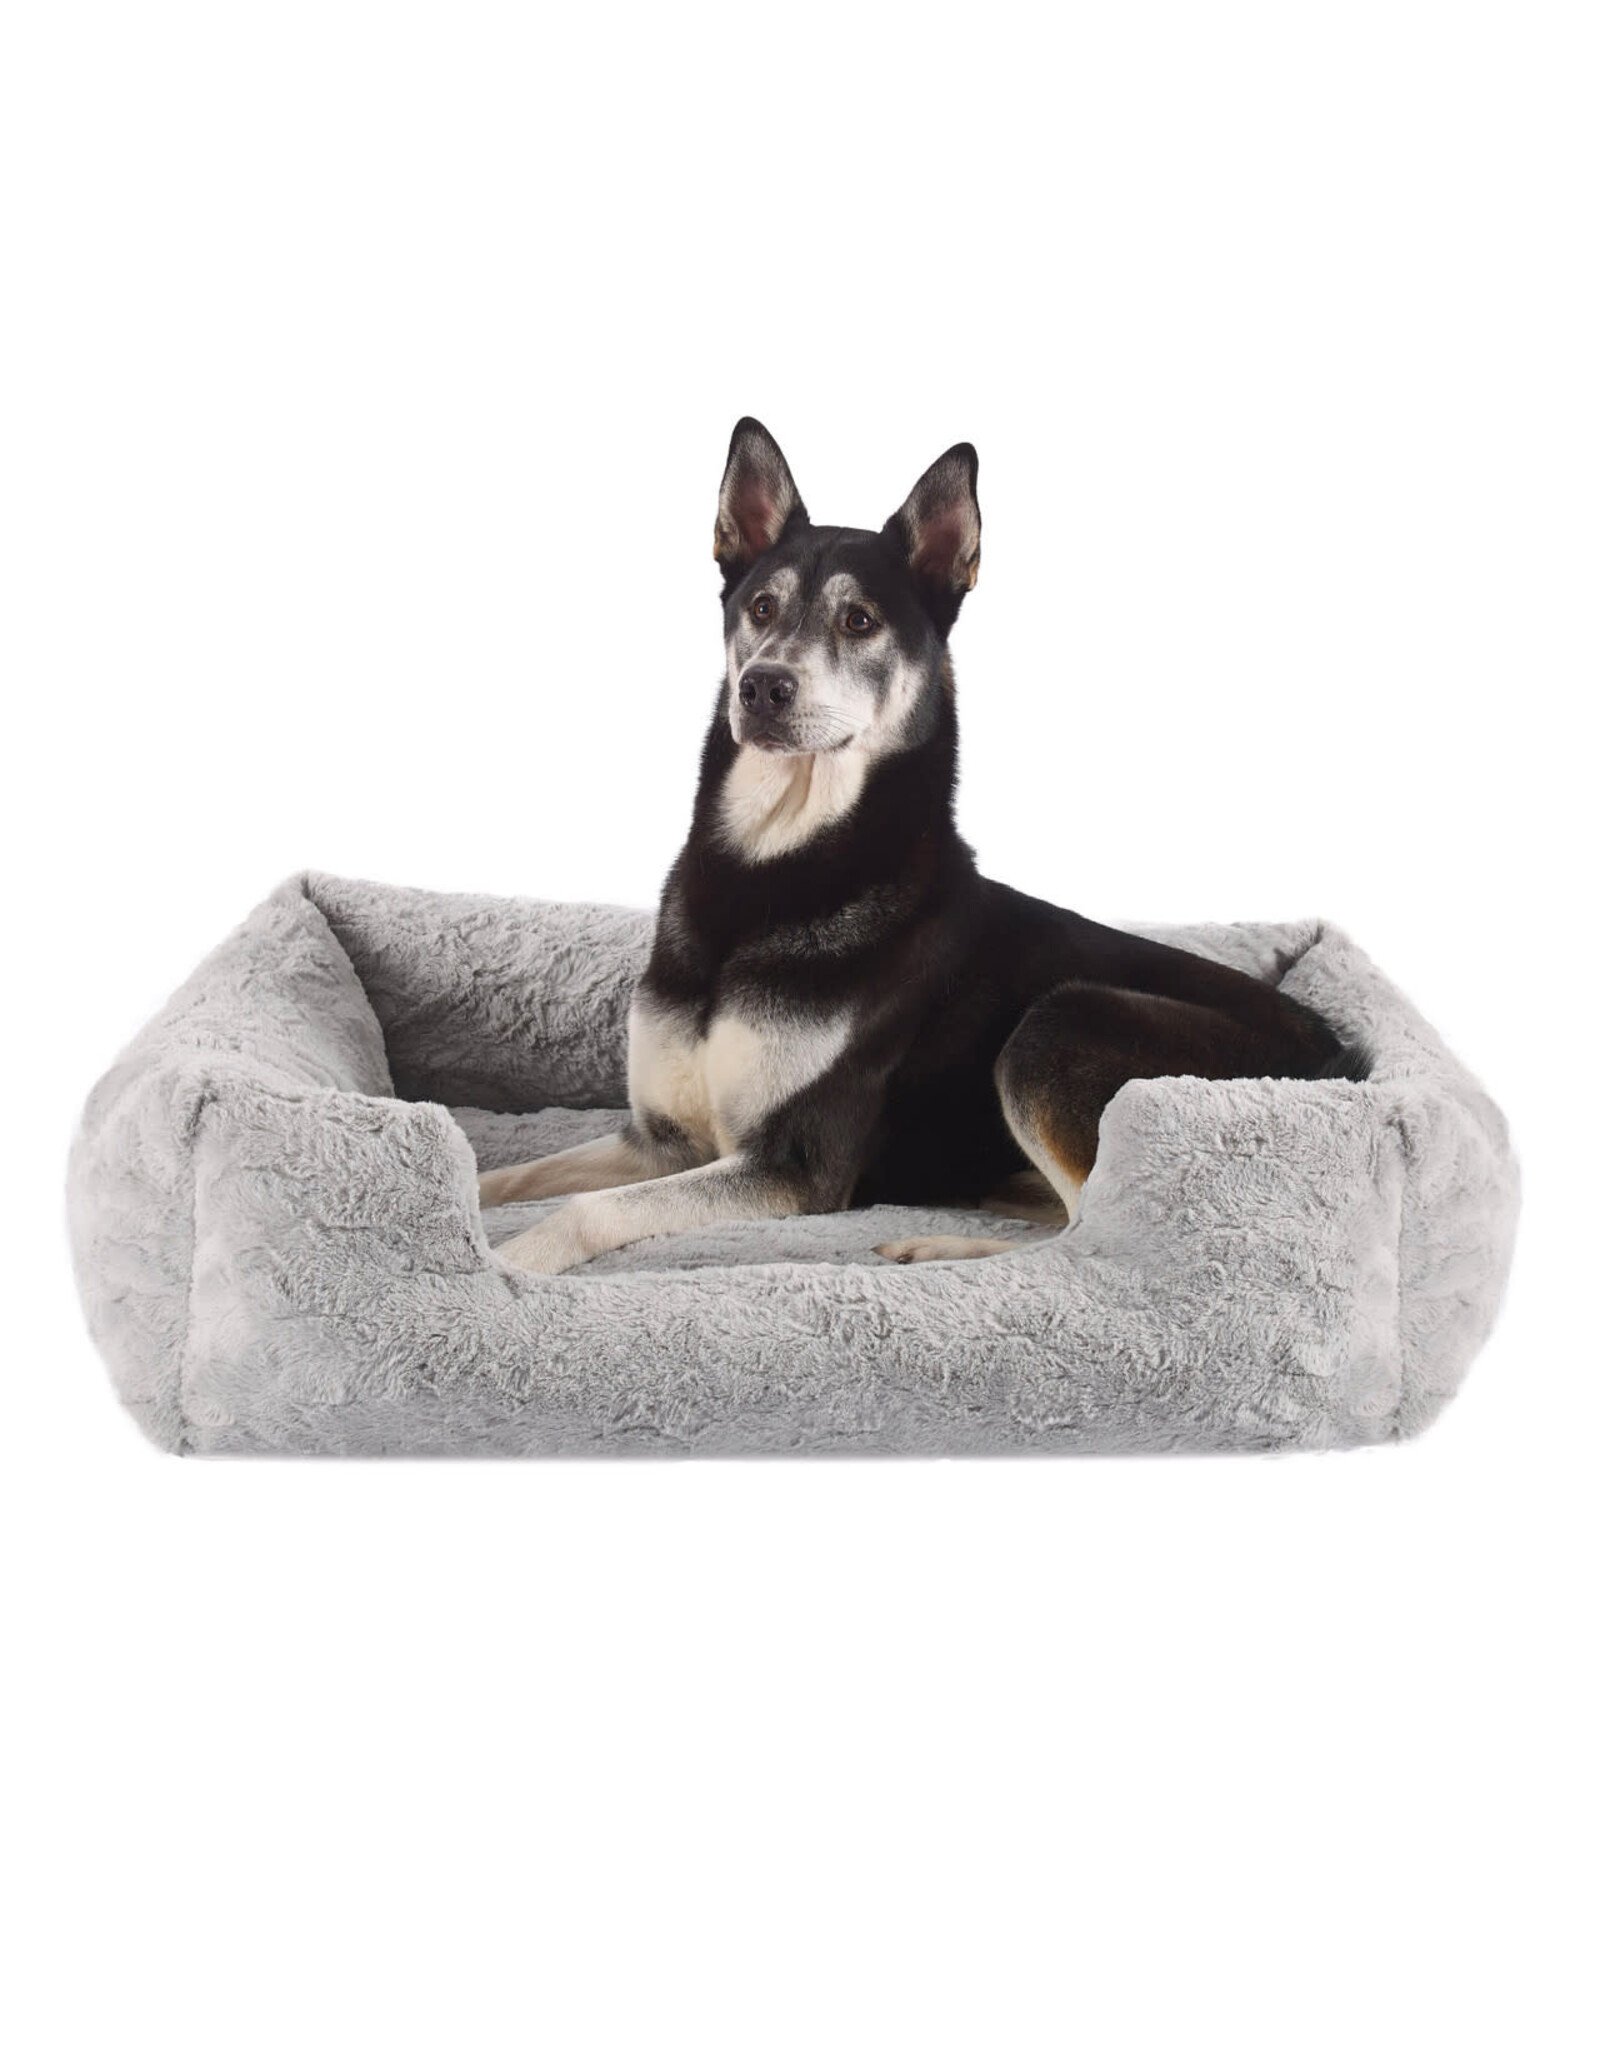 Outward Hound OUTWARD HOUND SOOTHE & SNOOZE LOUNGE PET BED